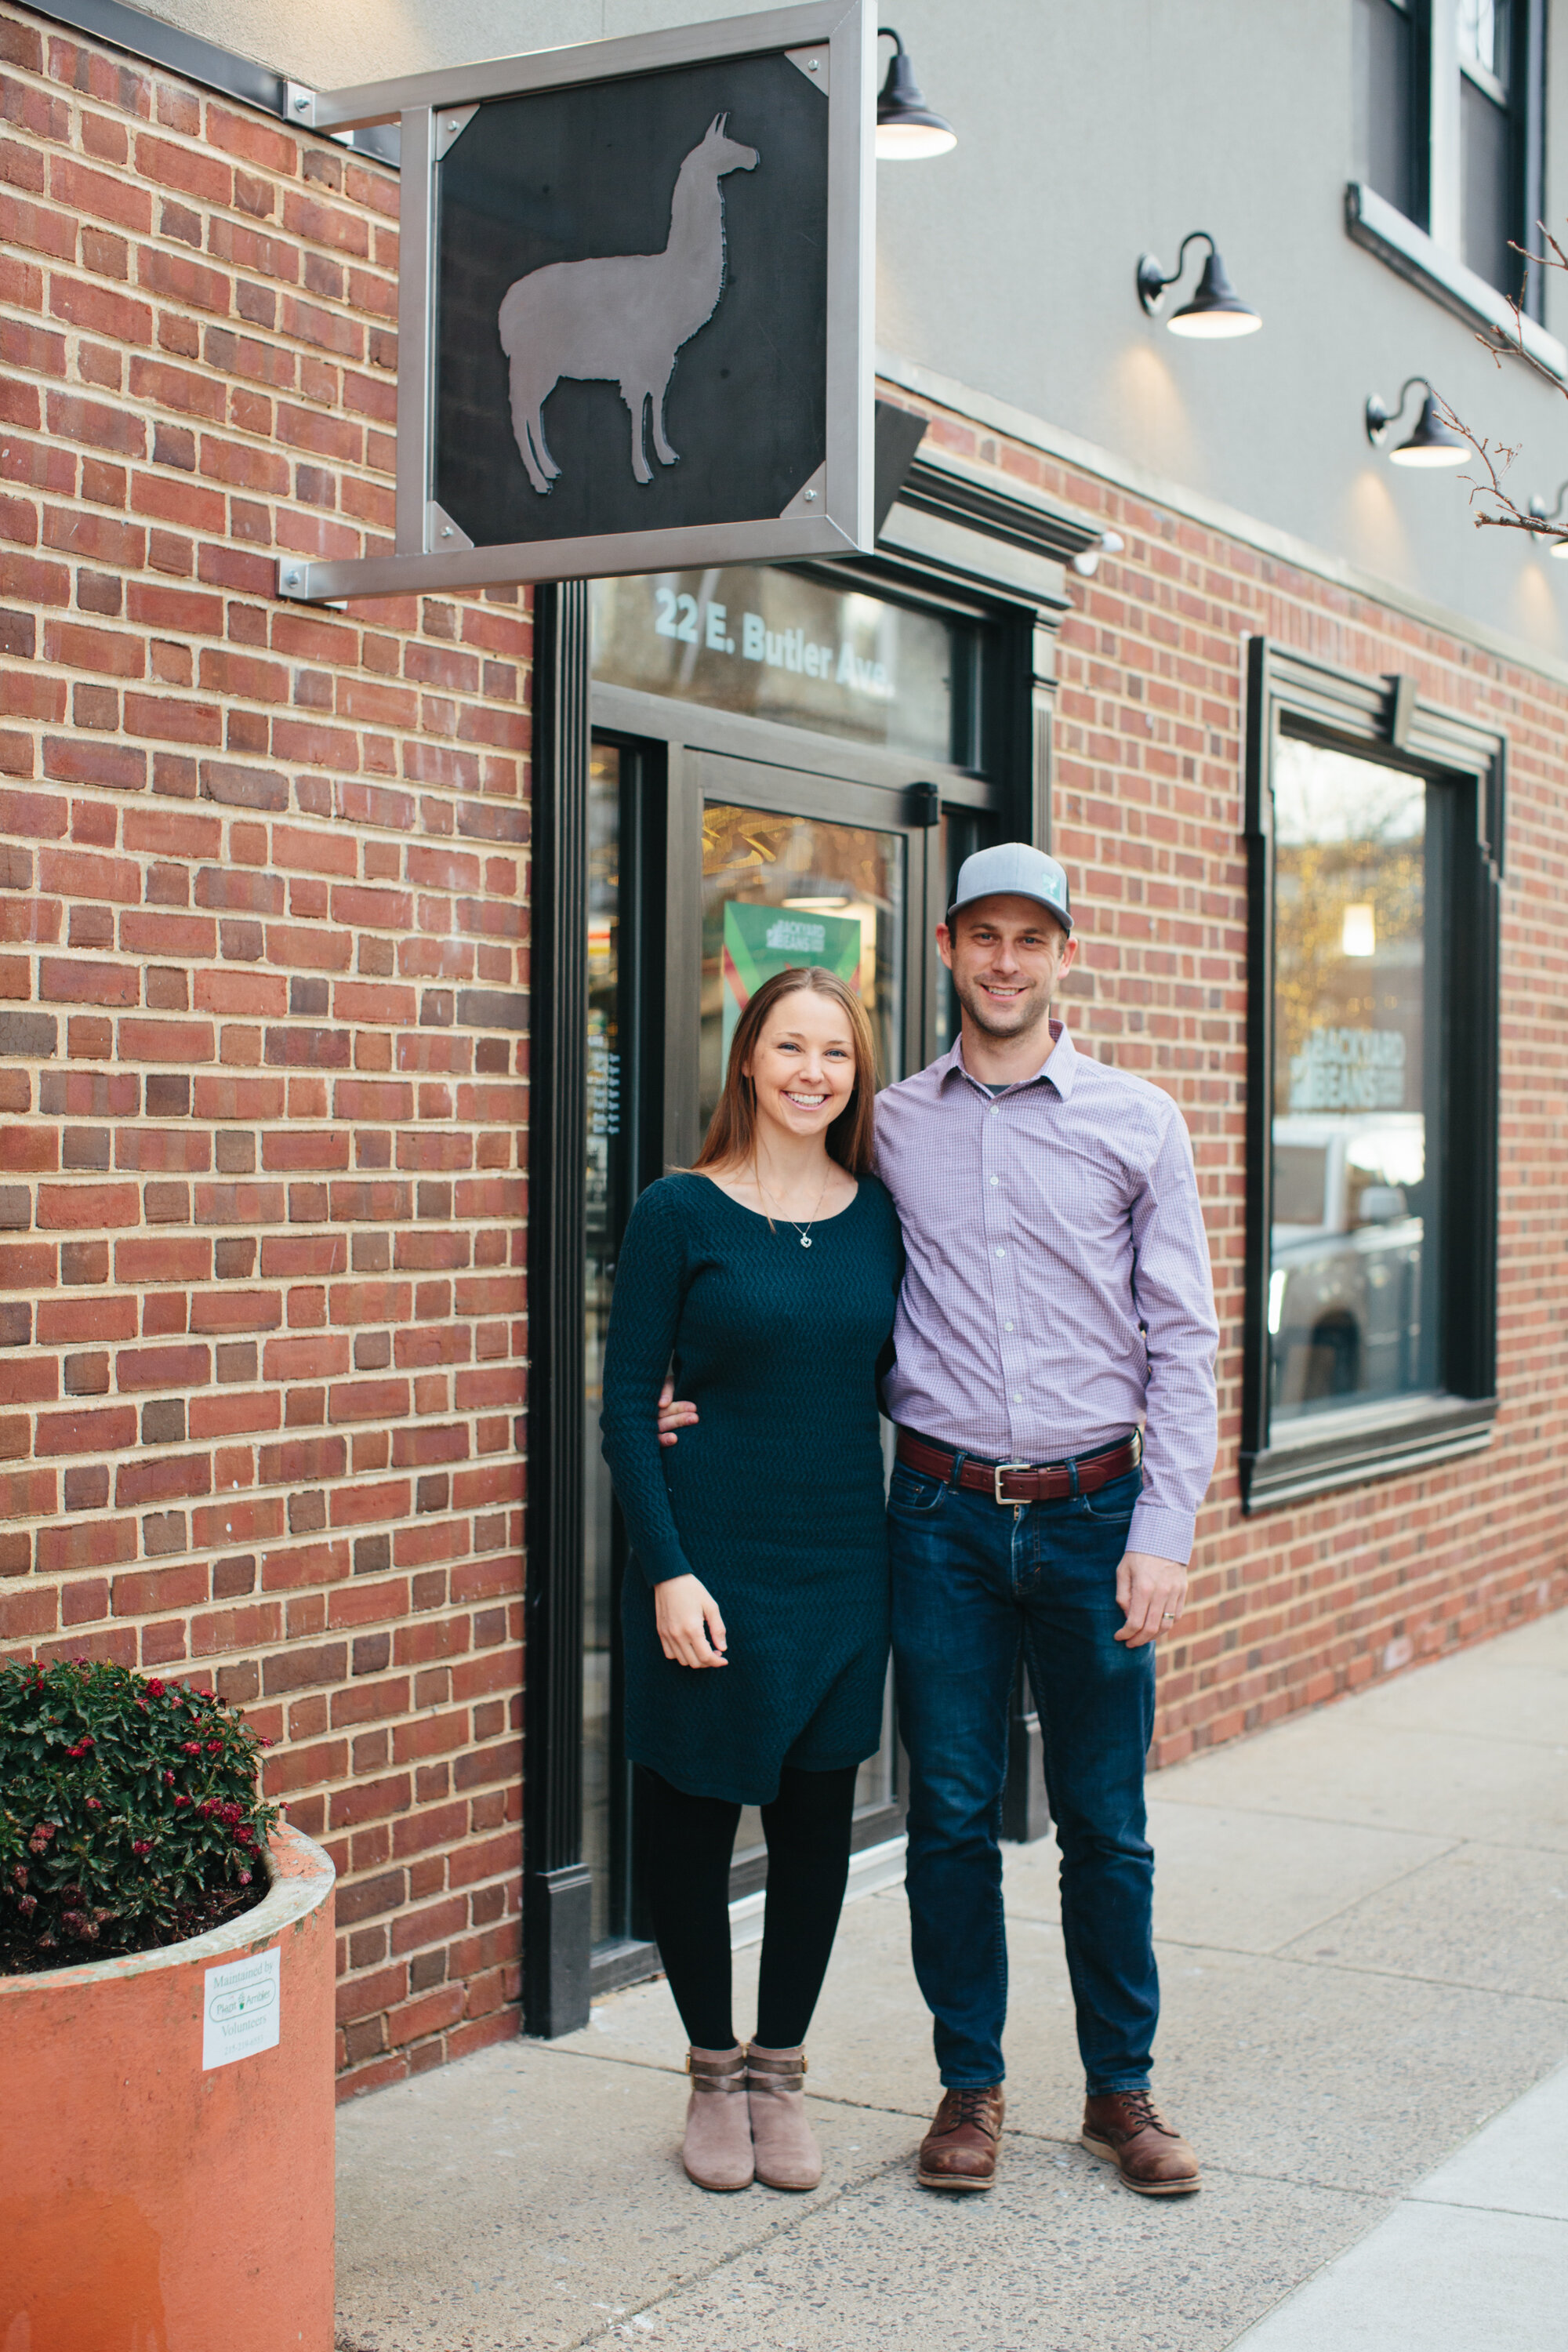 Image of Laura and Matthew Adams outside Ambler cafe.